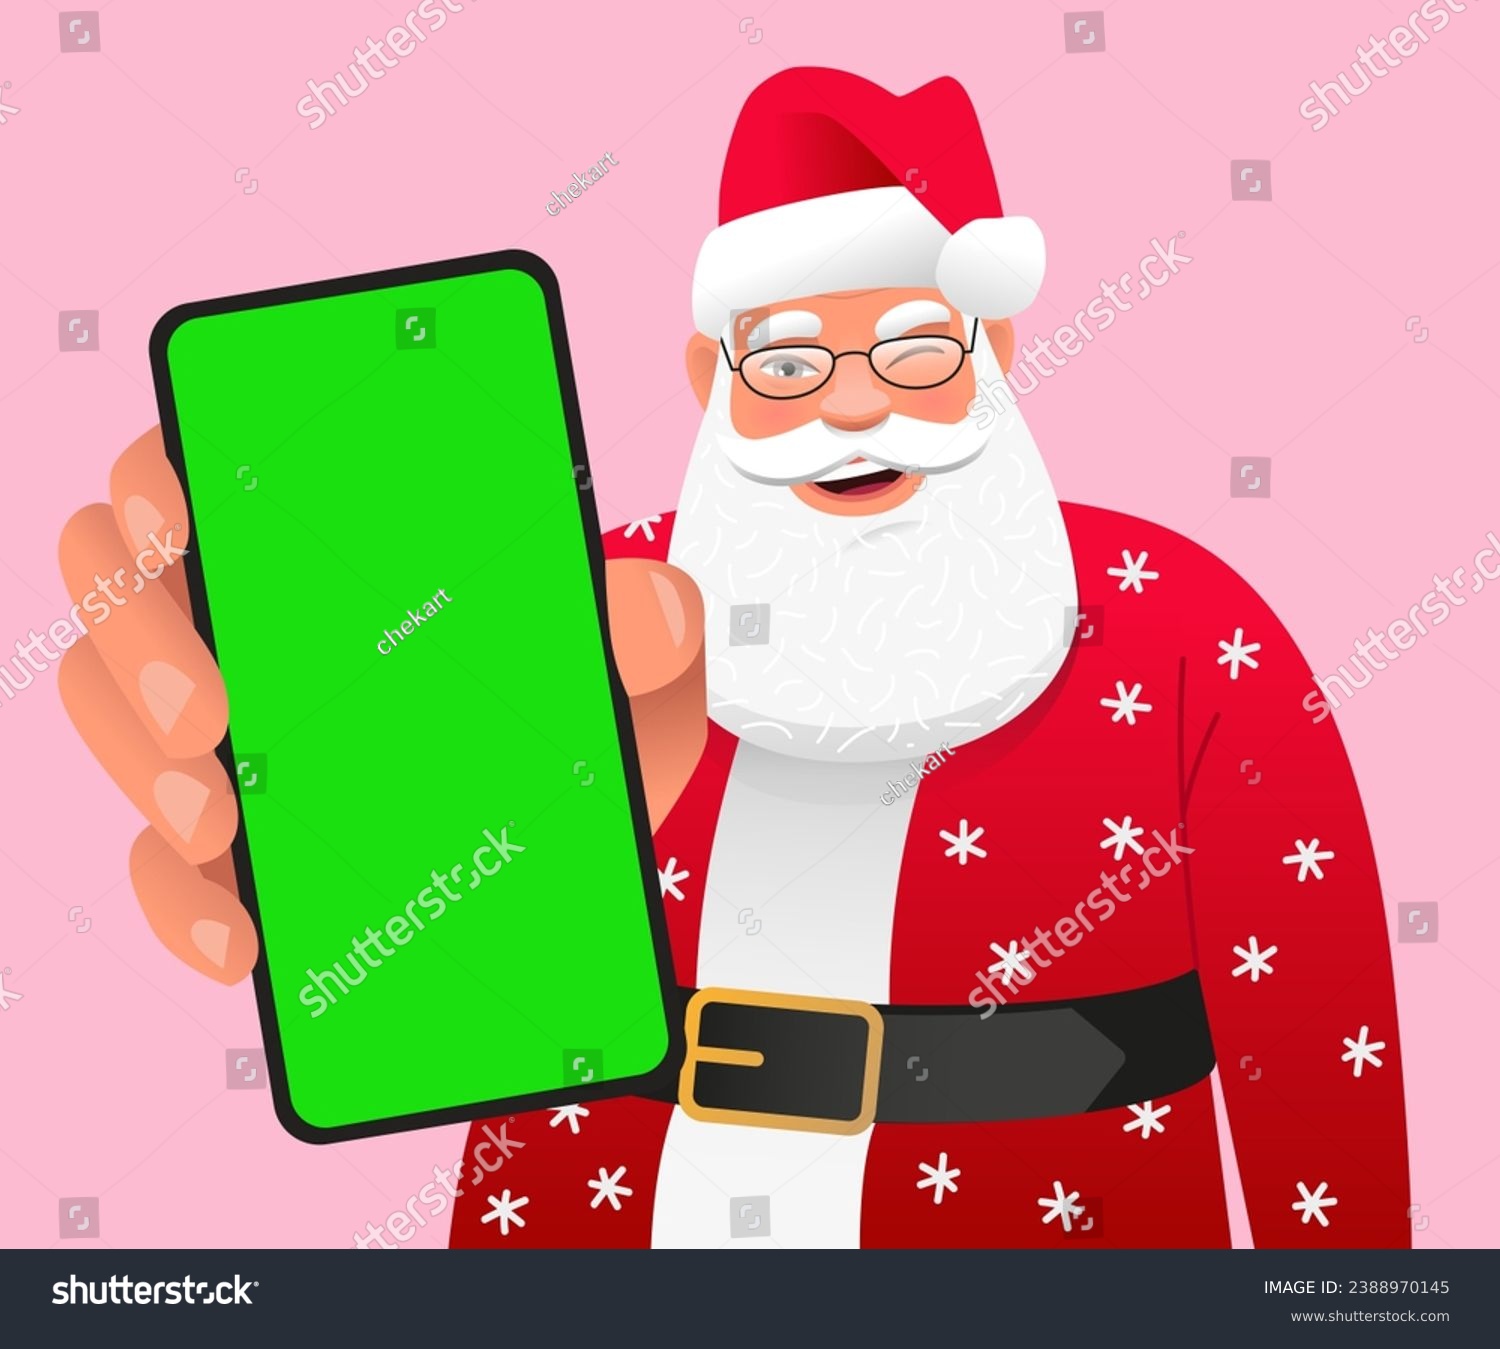 SVG of Old Santa Claus winks with a smartphone in his hand. Cute Santa shows a green phone screen to the camera in close-up. Place to advertise a mobile app. Vector illustration. svg